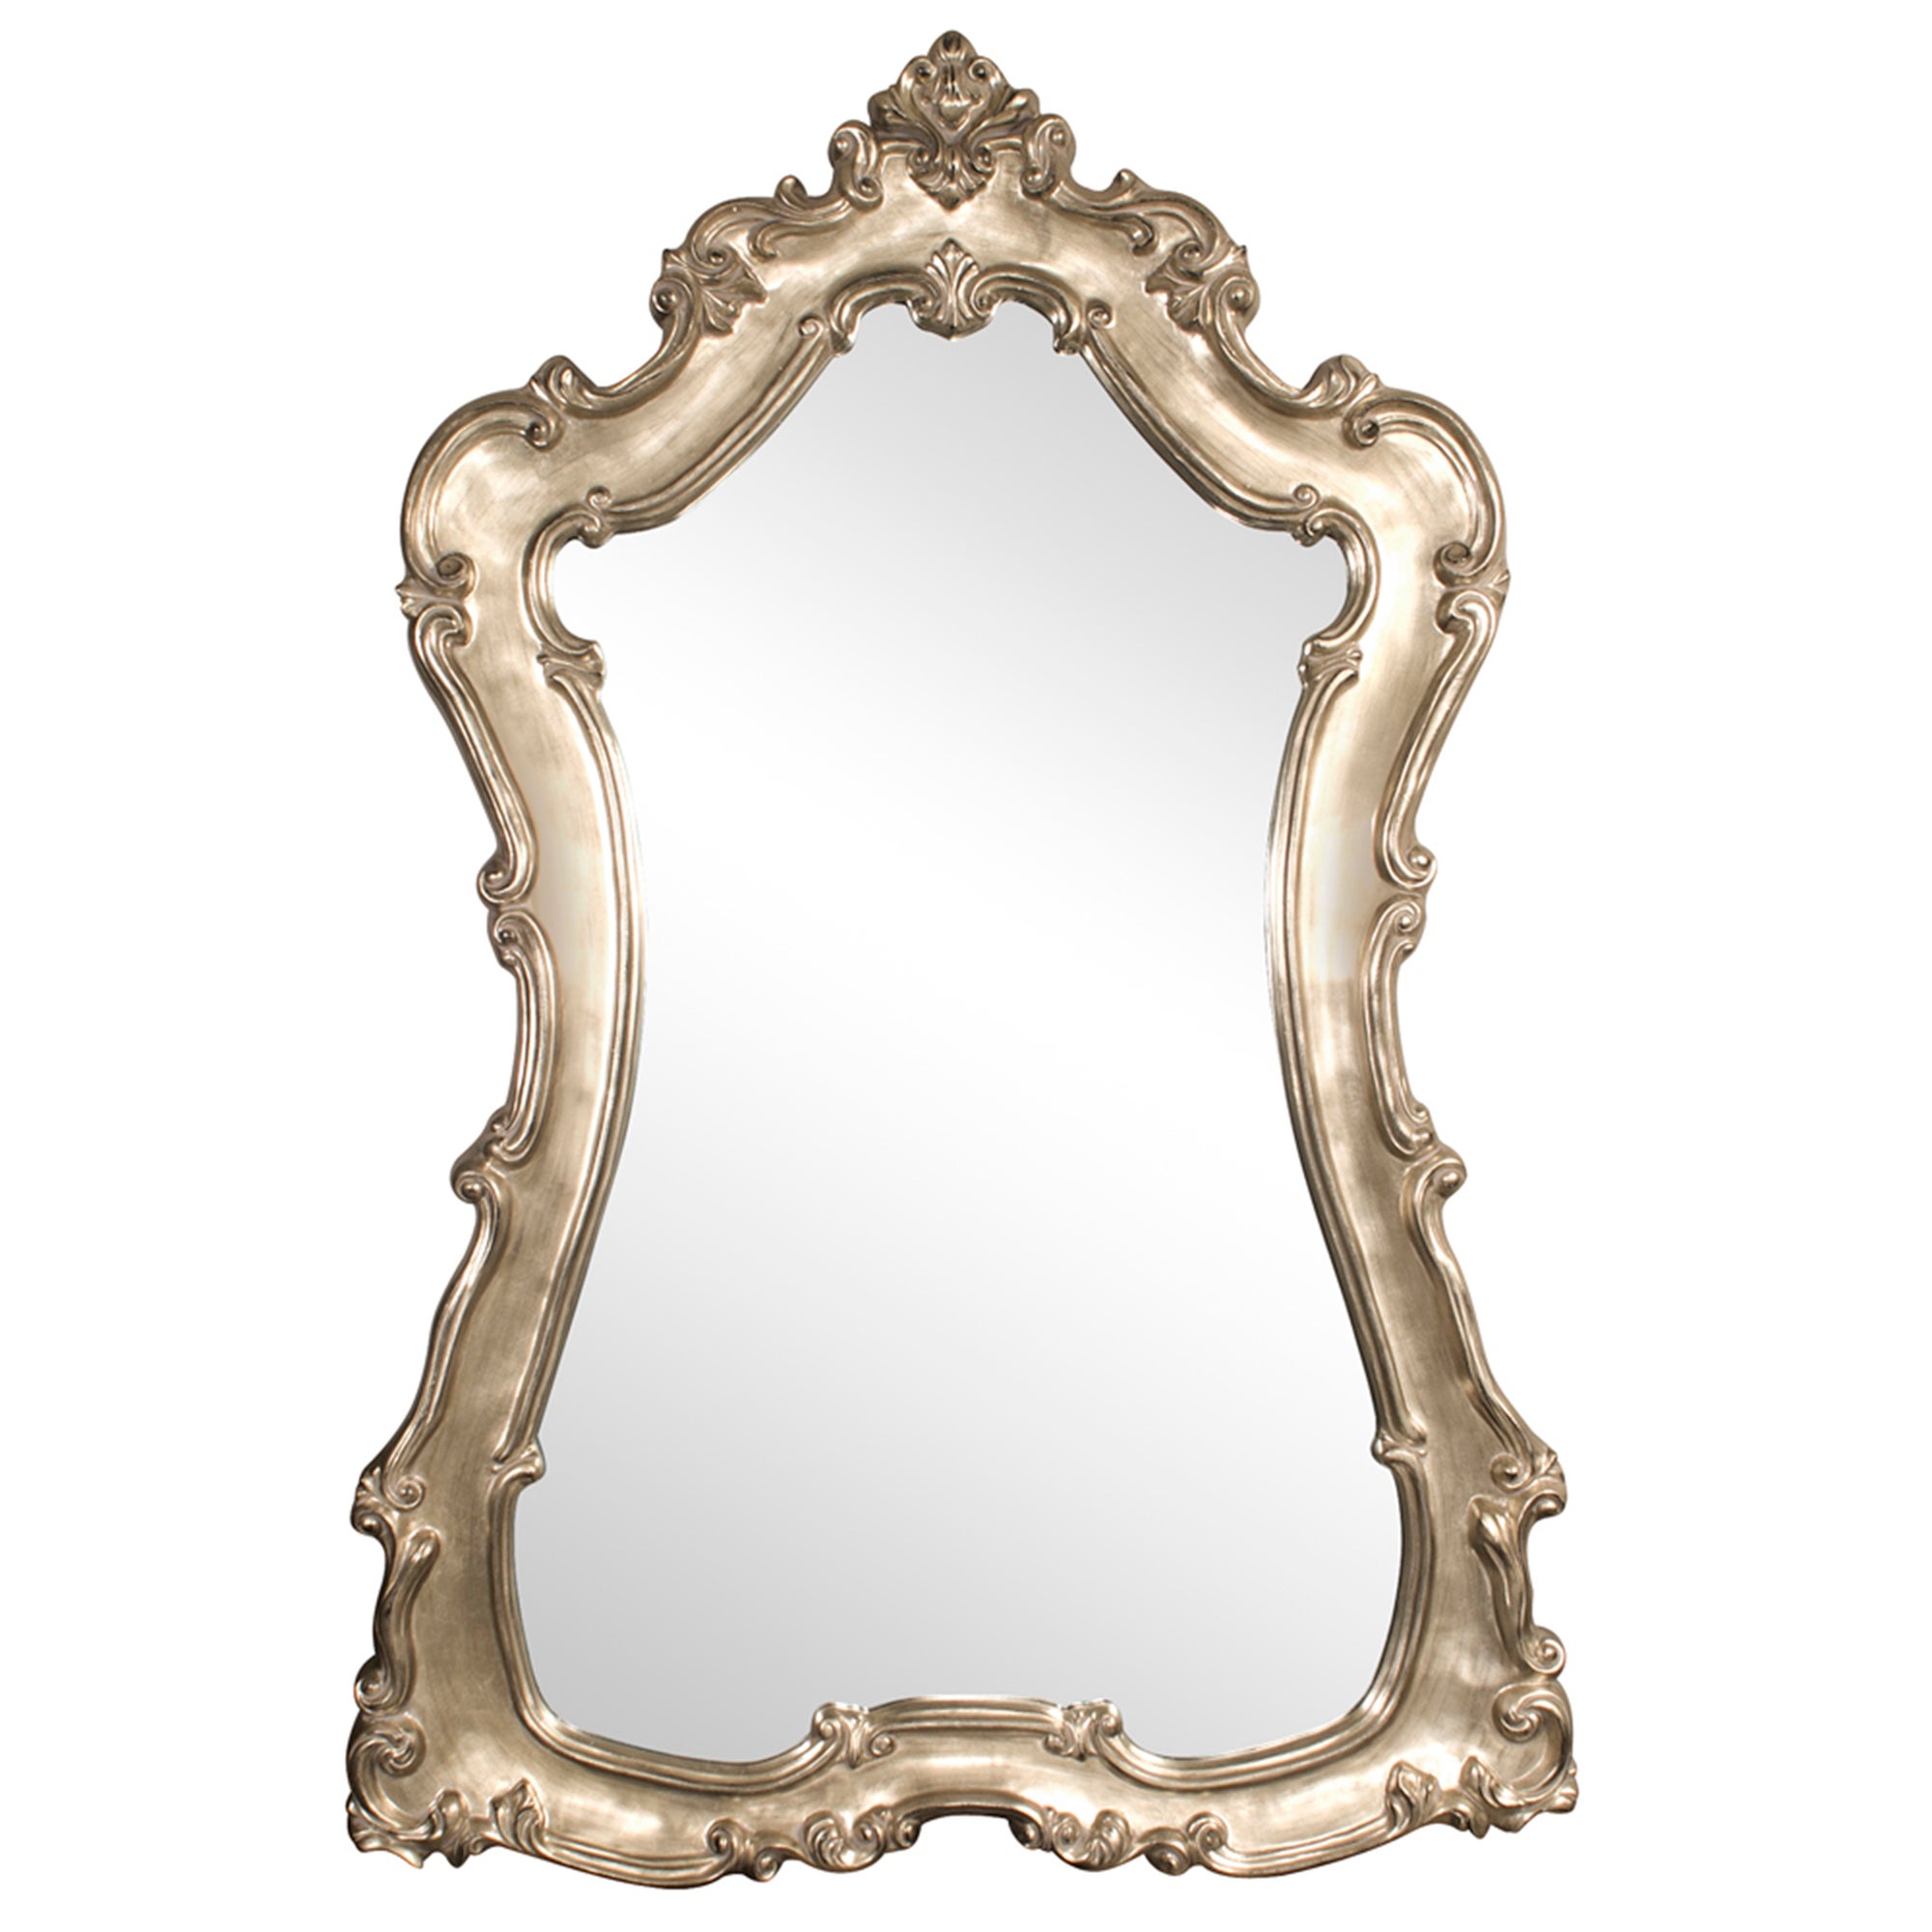 Mirrors - Traditional | The Howard Elliott Collection